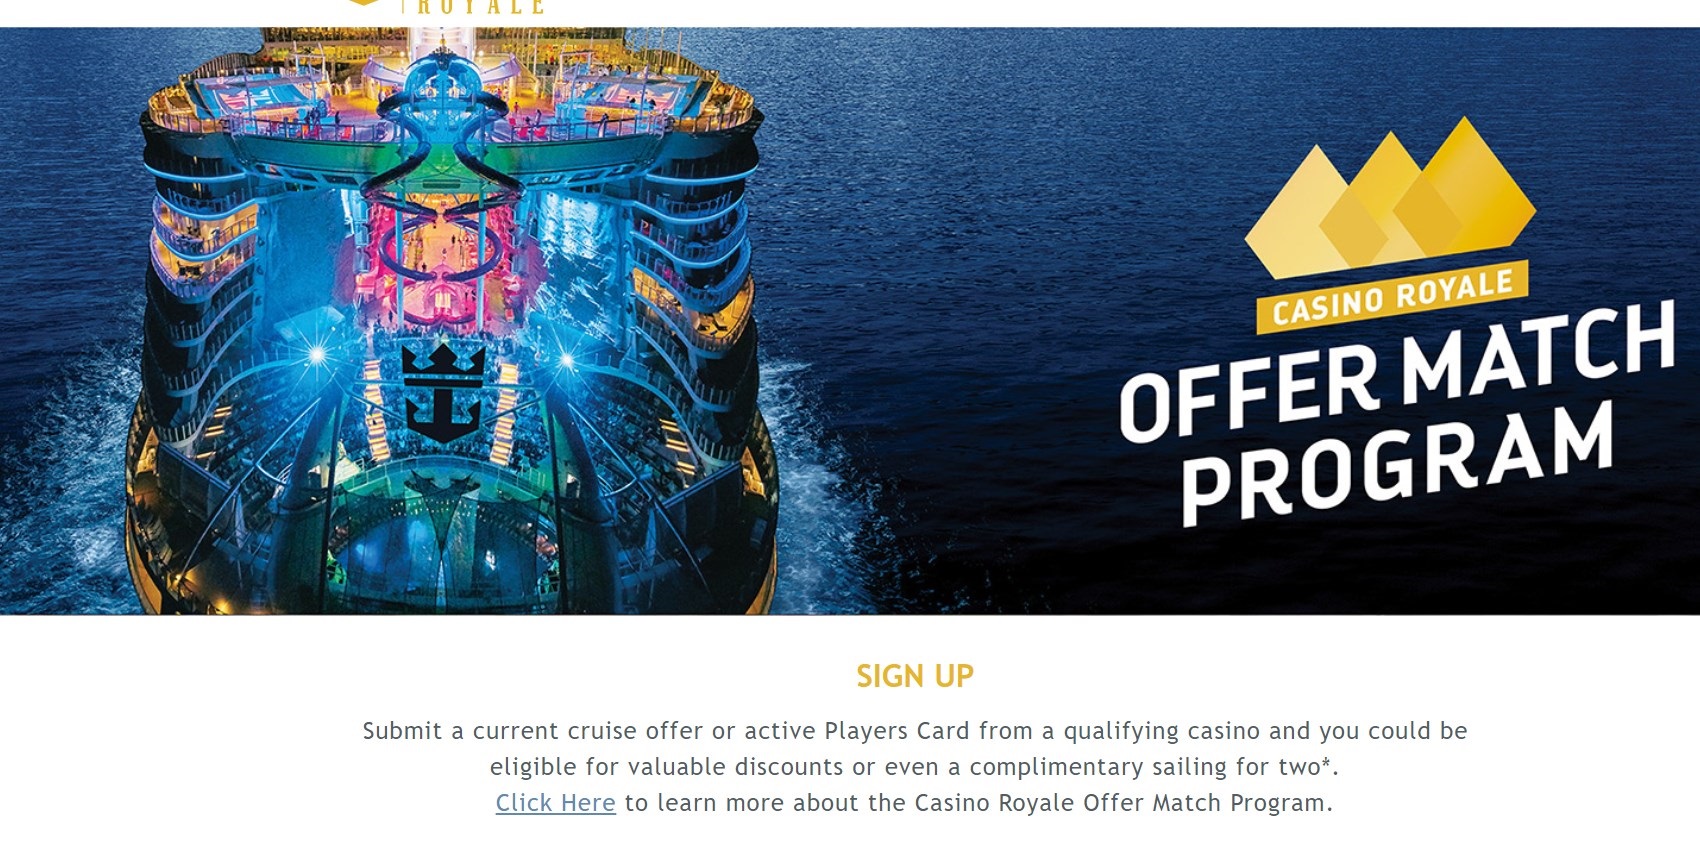 “Free” Royal Caribbean cruise match offer & kids sail free stack (parlay that Ca..